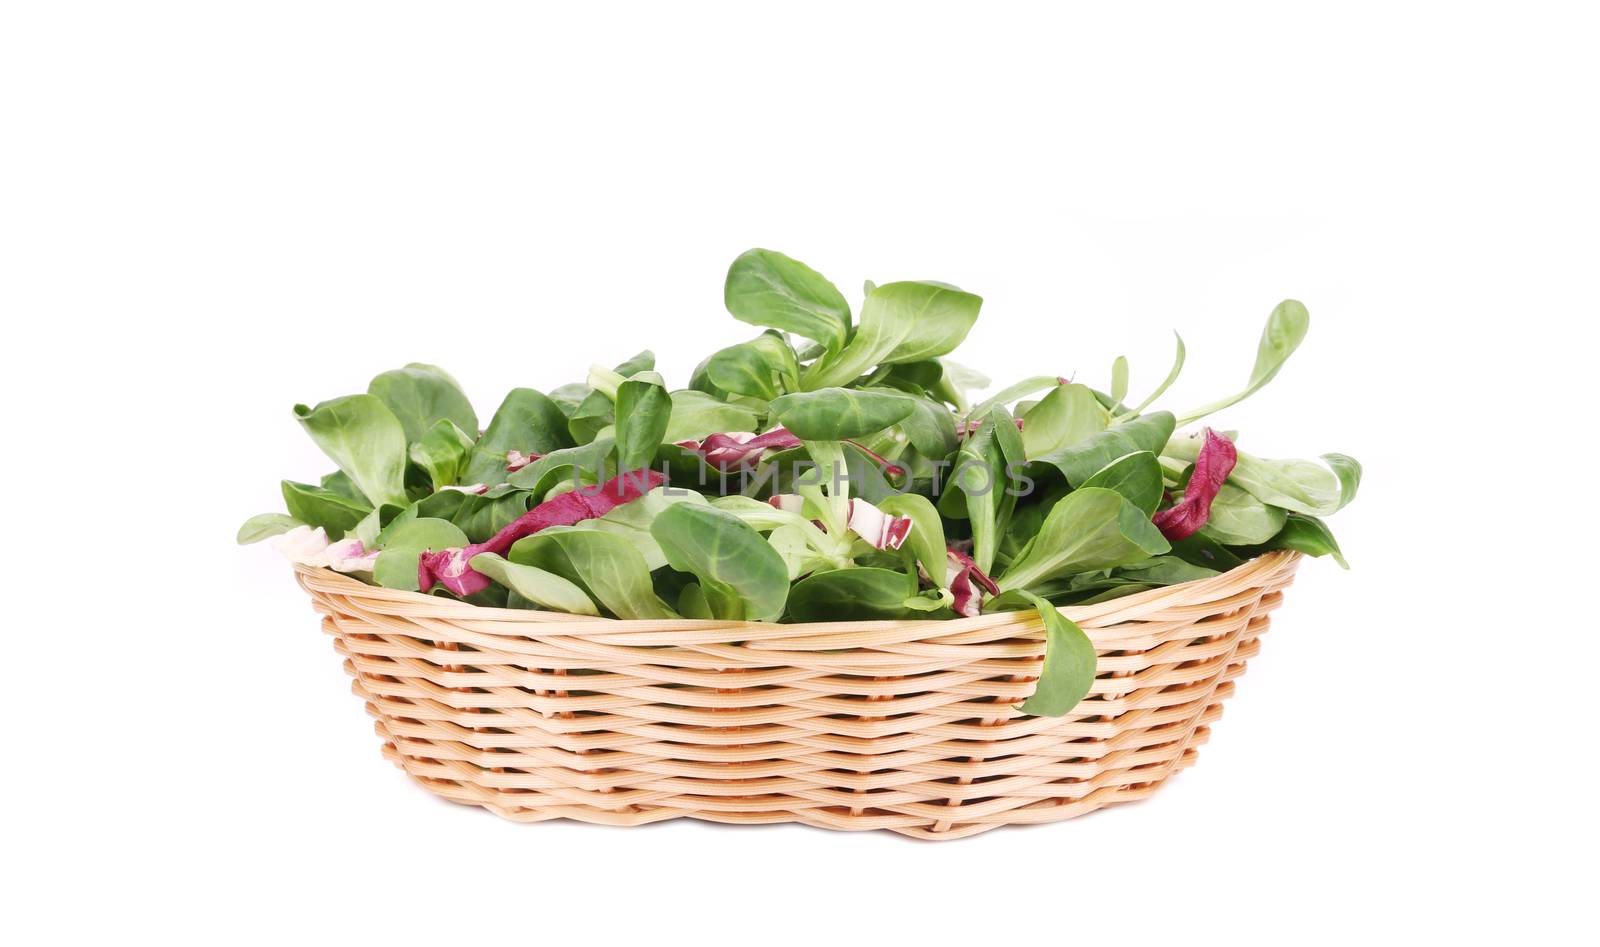 Spinach and radicchio rosso mix on wicker basket. by indigolotos